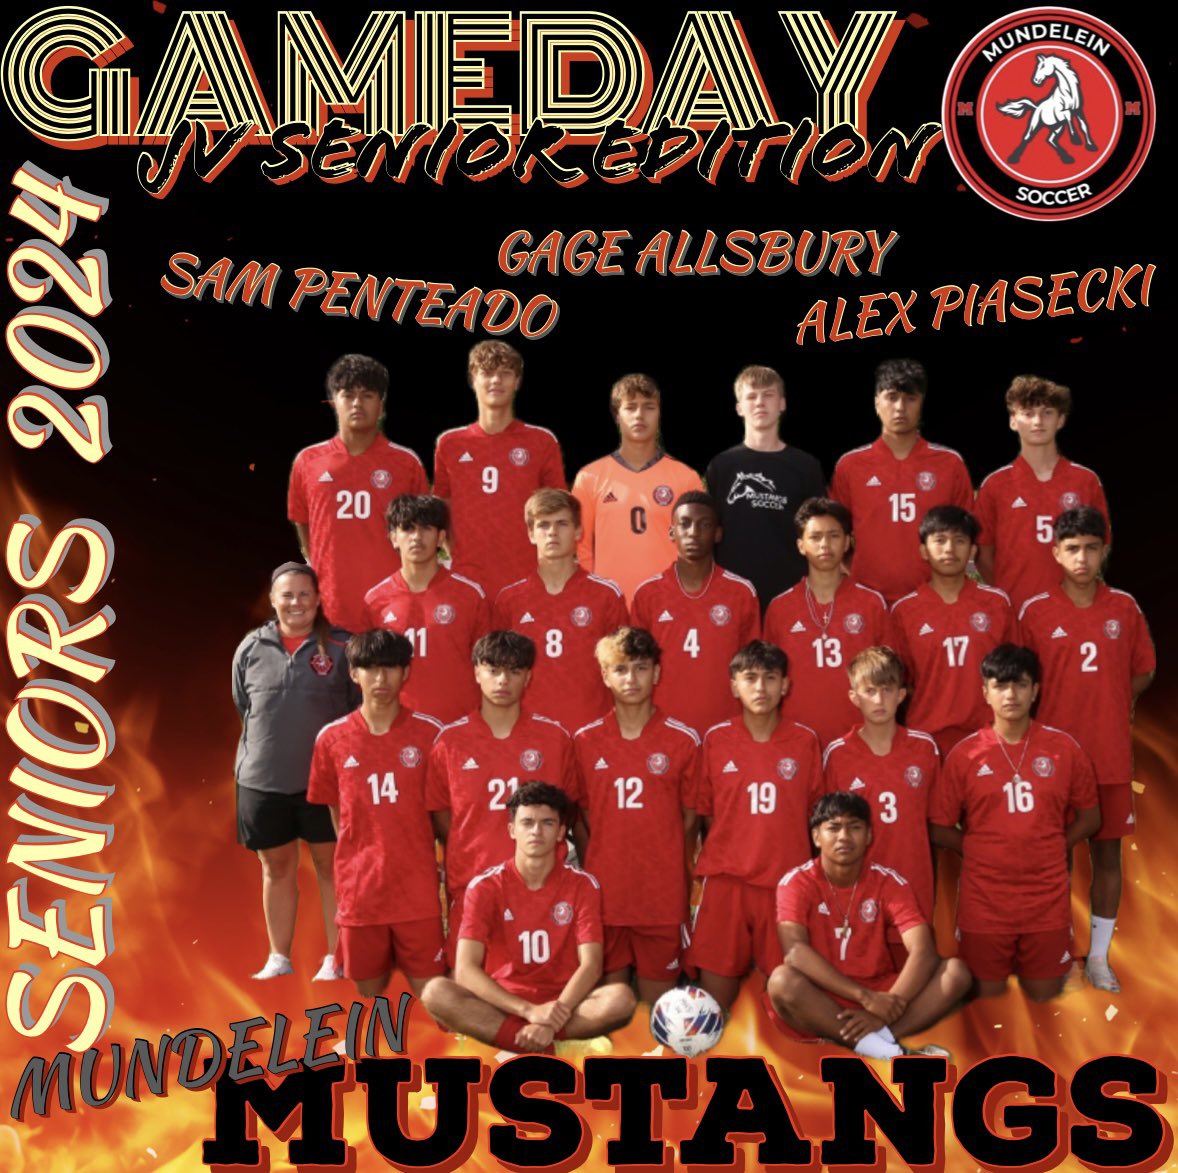 🎉SENIOR NIGHT!!! ⚽️Come out  2morrow-HOME @ 4:45pm Game & 6:30pm ceremony to honor the JV1 seniors🔥Sam Penteado, Alex Piasecki & Mgr. Gage Allsbury!! Thank you for all u have done for the program! 🐎#RollStangs #AlwaysAMustang @GoMHS_Athletics @MundBoosterClub @Shorty11233